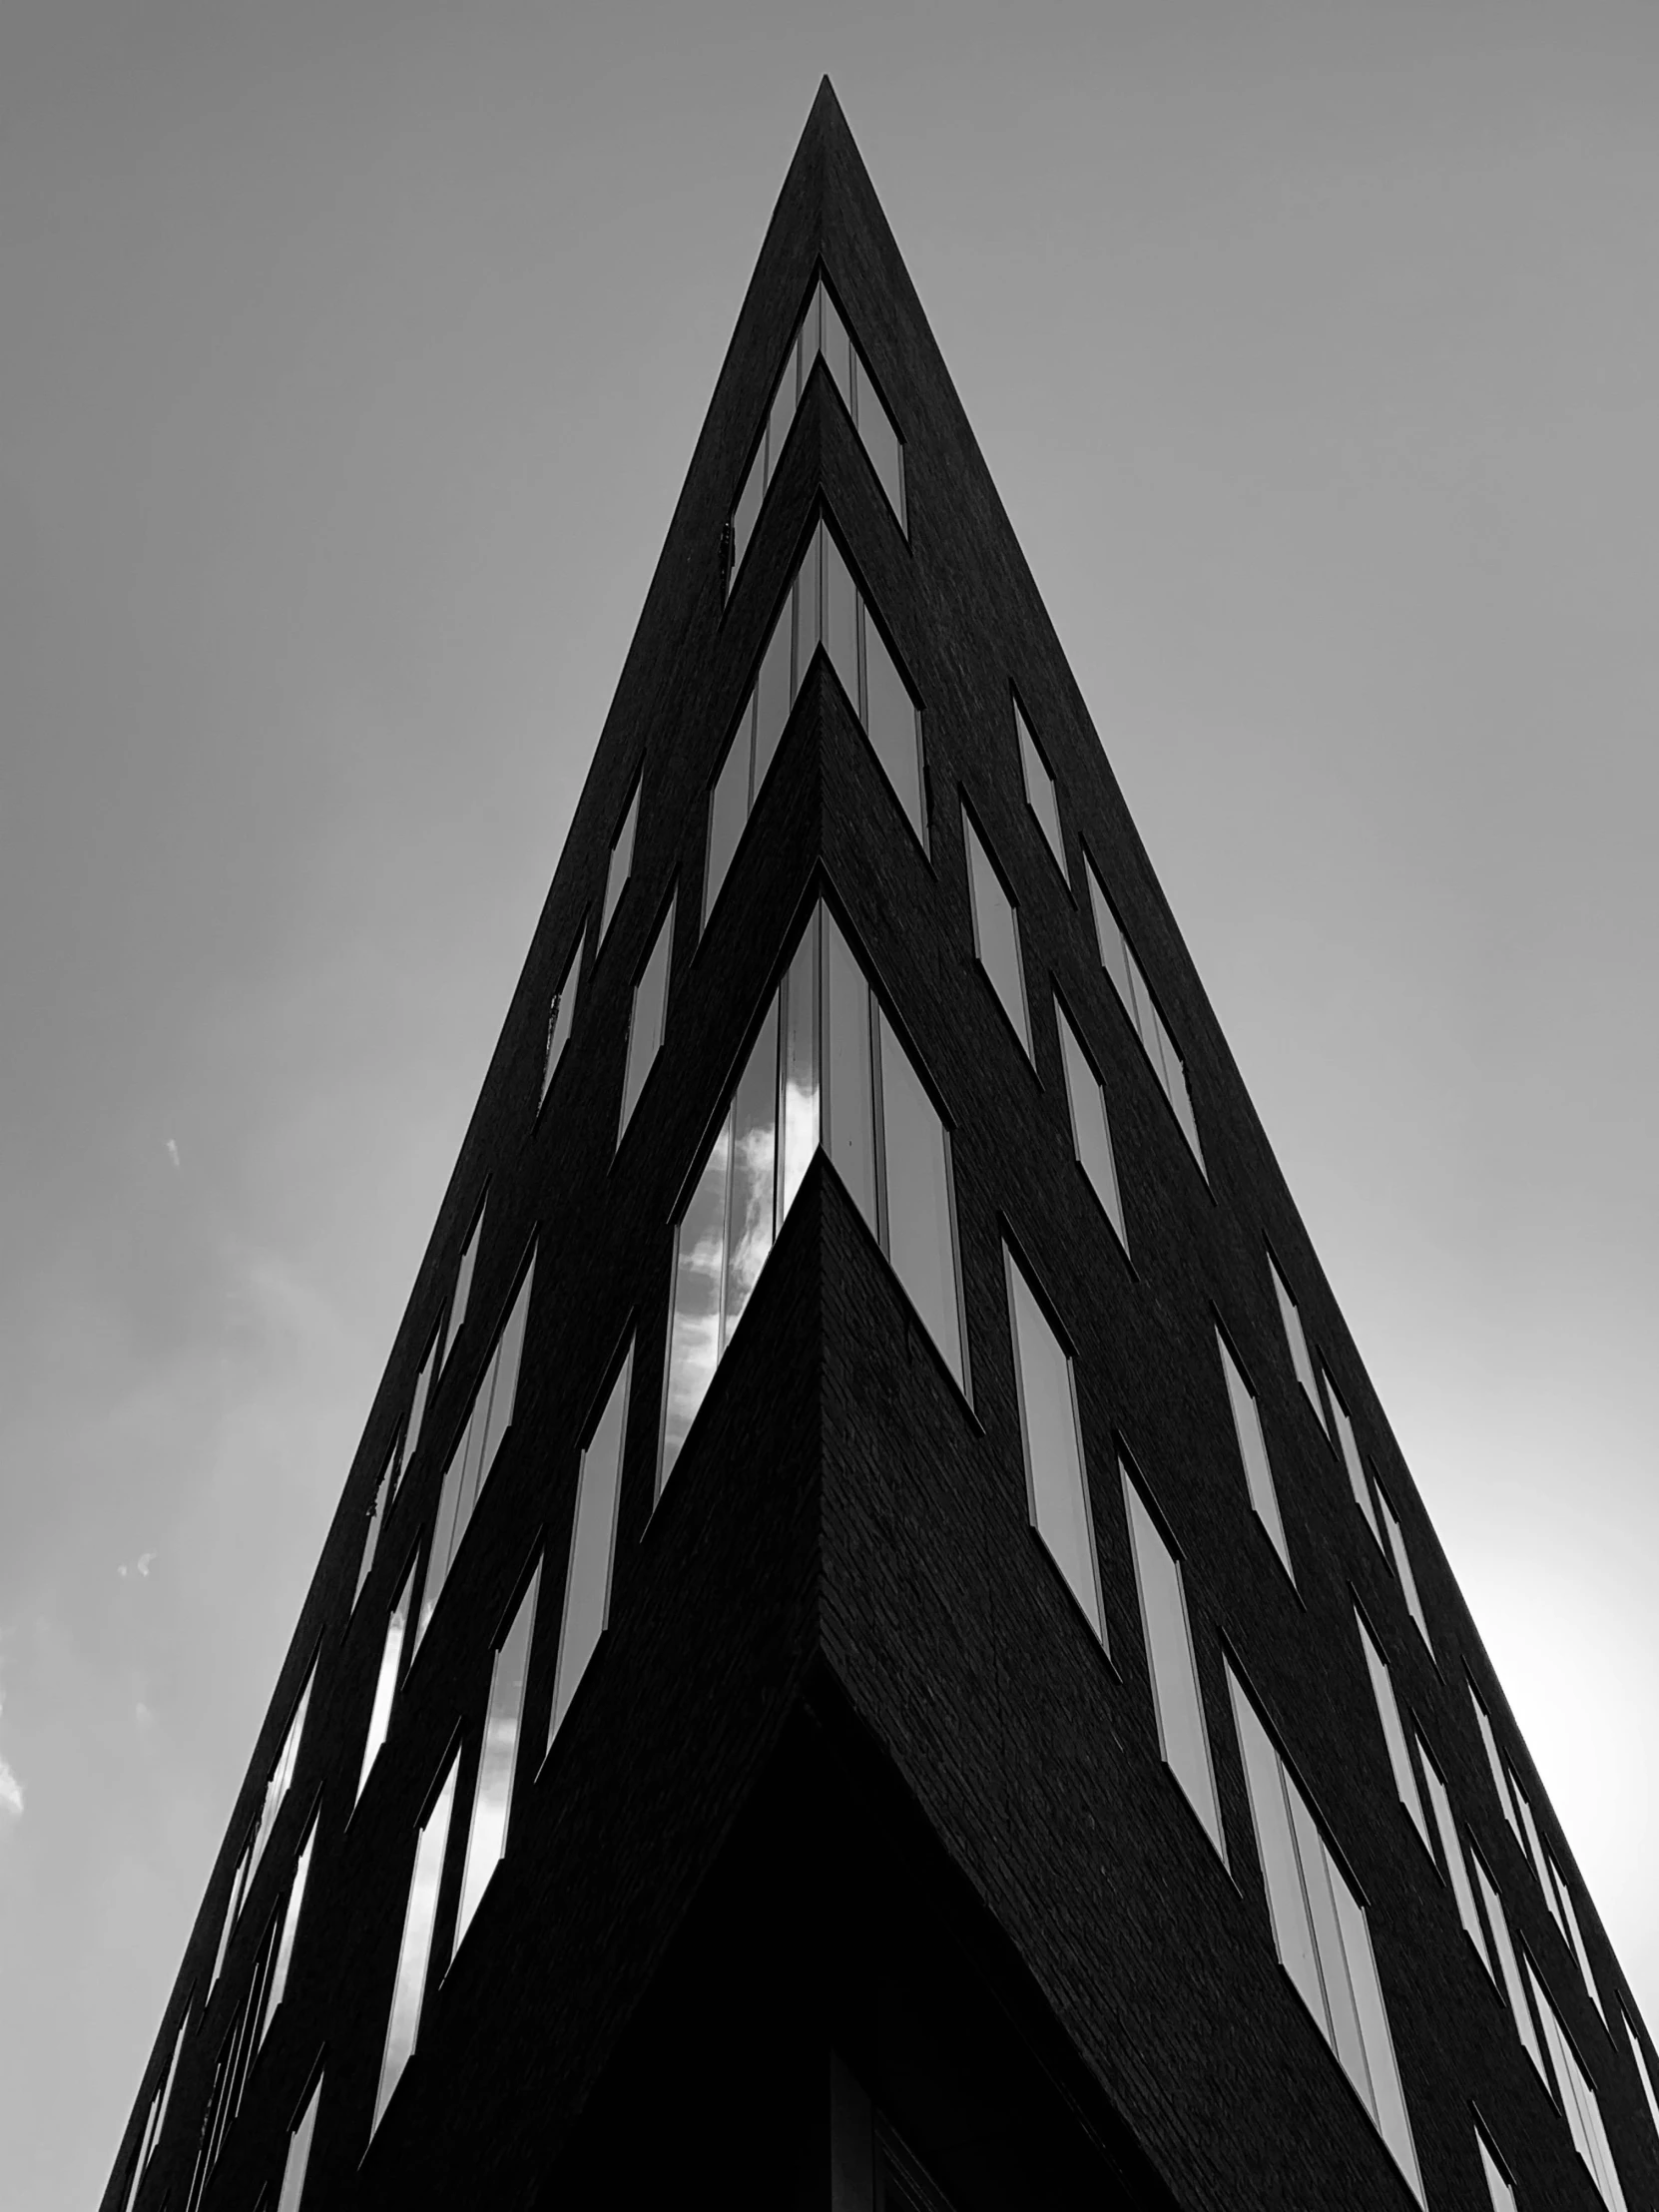 a black and white photo of a tall building, by Adam Rex, triangular face, low angle!!!!, dutch angle digital art, dramatic lighting - n 9